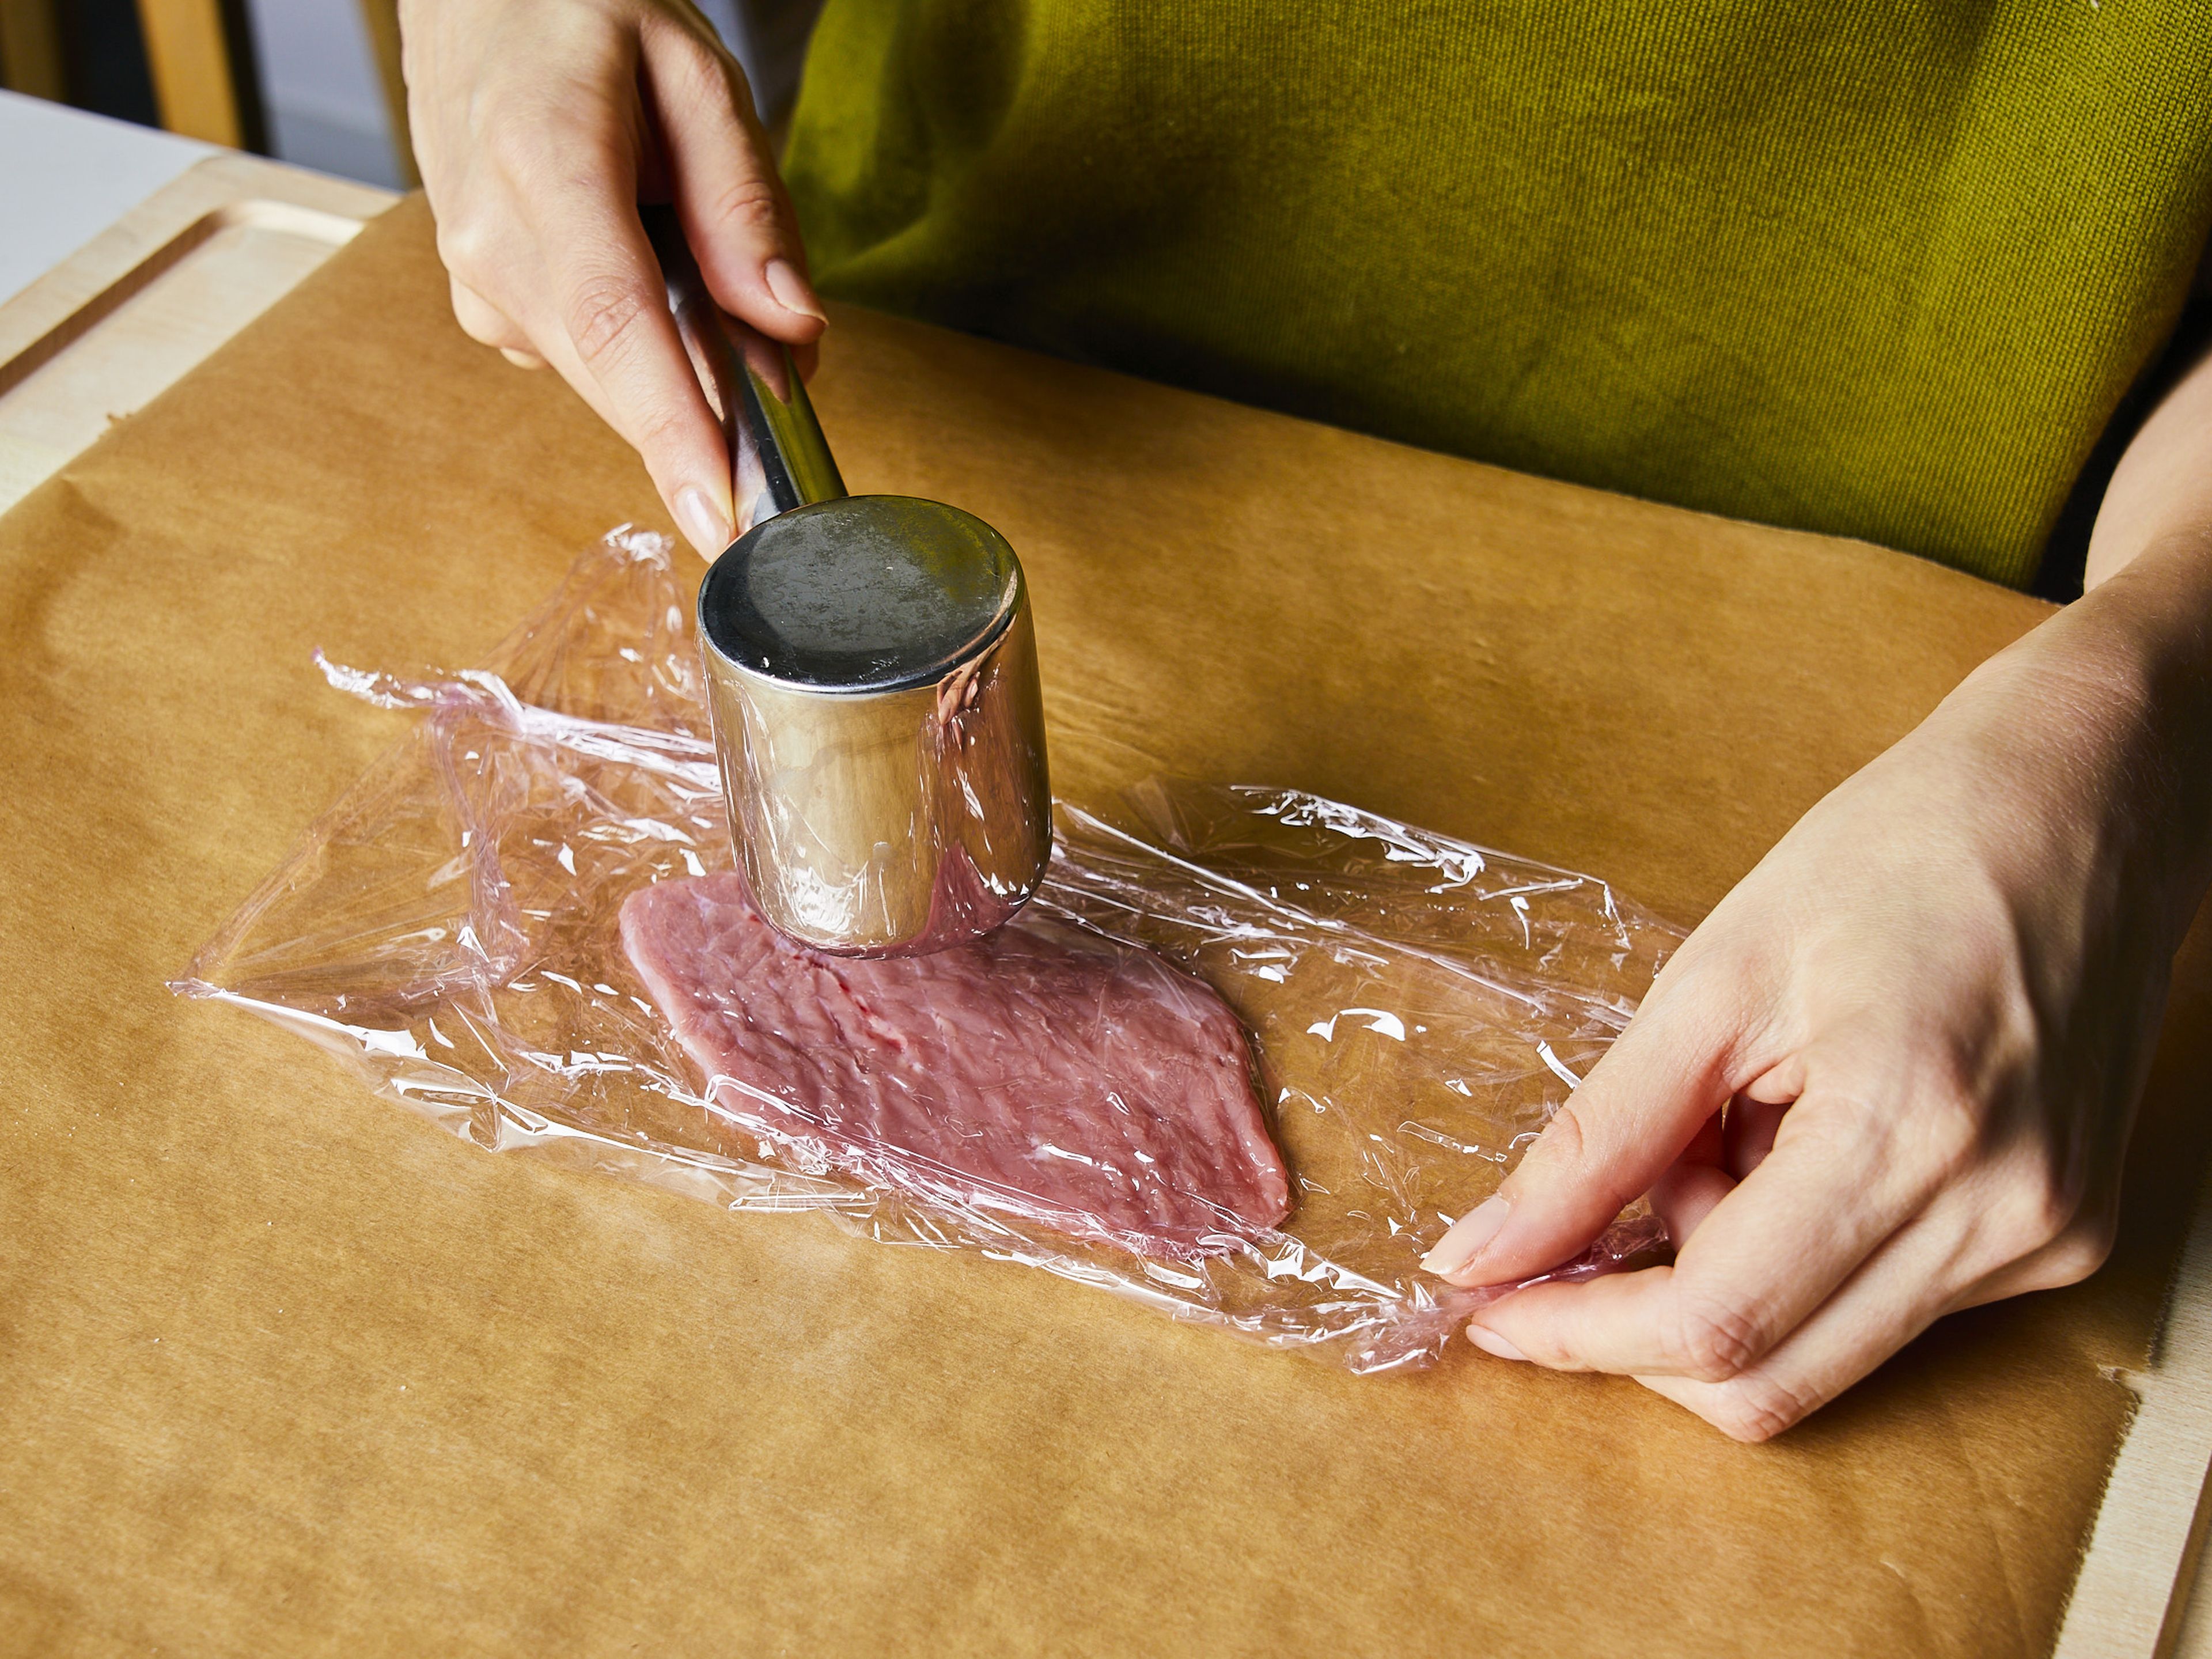 Cut veal cutlets into portions. Prepare a sheet of plastic wrap on a working surface, place the veal cutlets on top, and cover with plastic wrap. Flatten the cutlets using a meat tenderizer. Transfer to a plate and repeat with remaining veal cutlets.